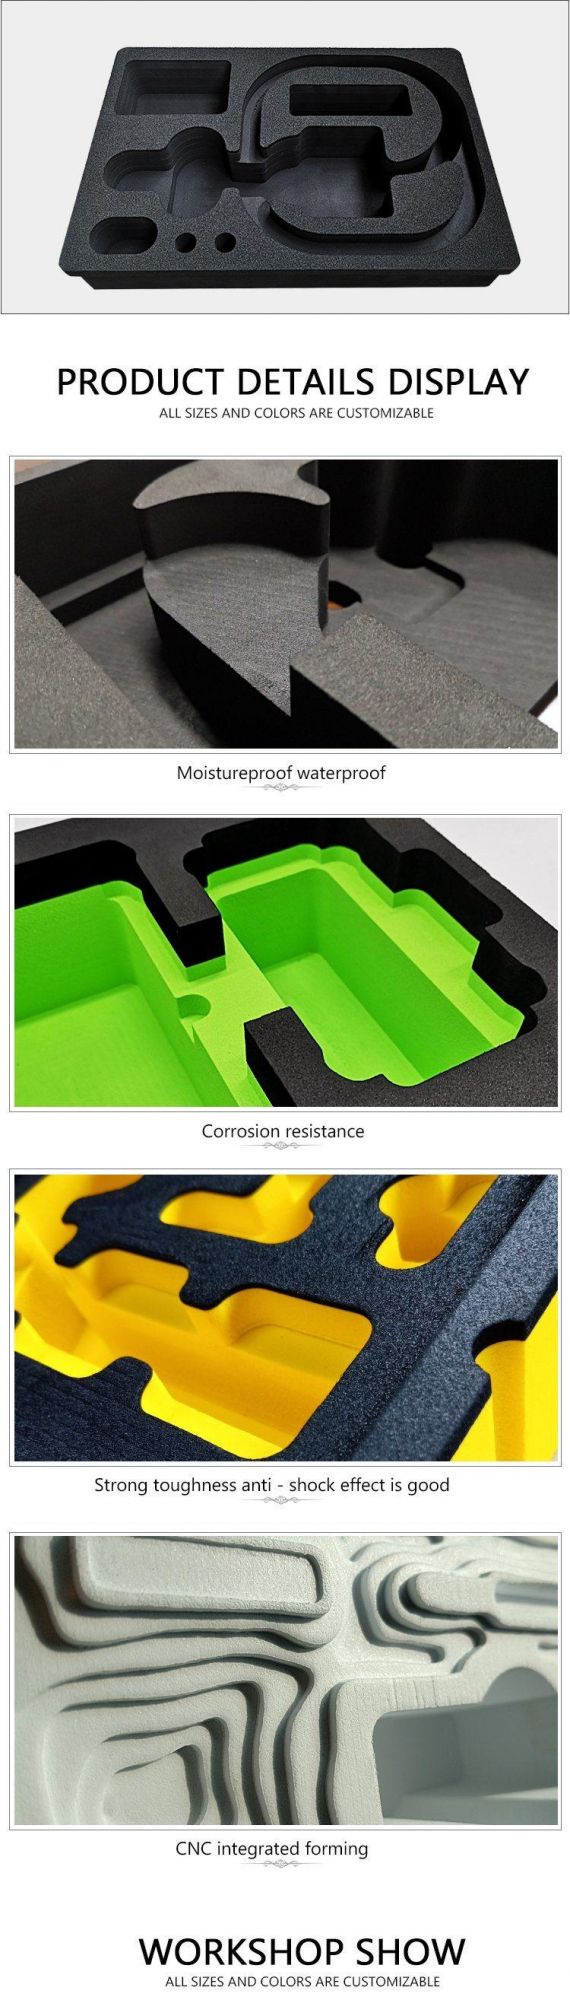 Different Shape Customized EVA Foam Inserts Packing Materials for Tool Box Lining